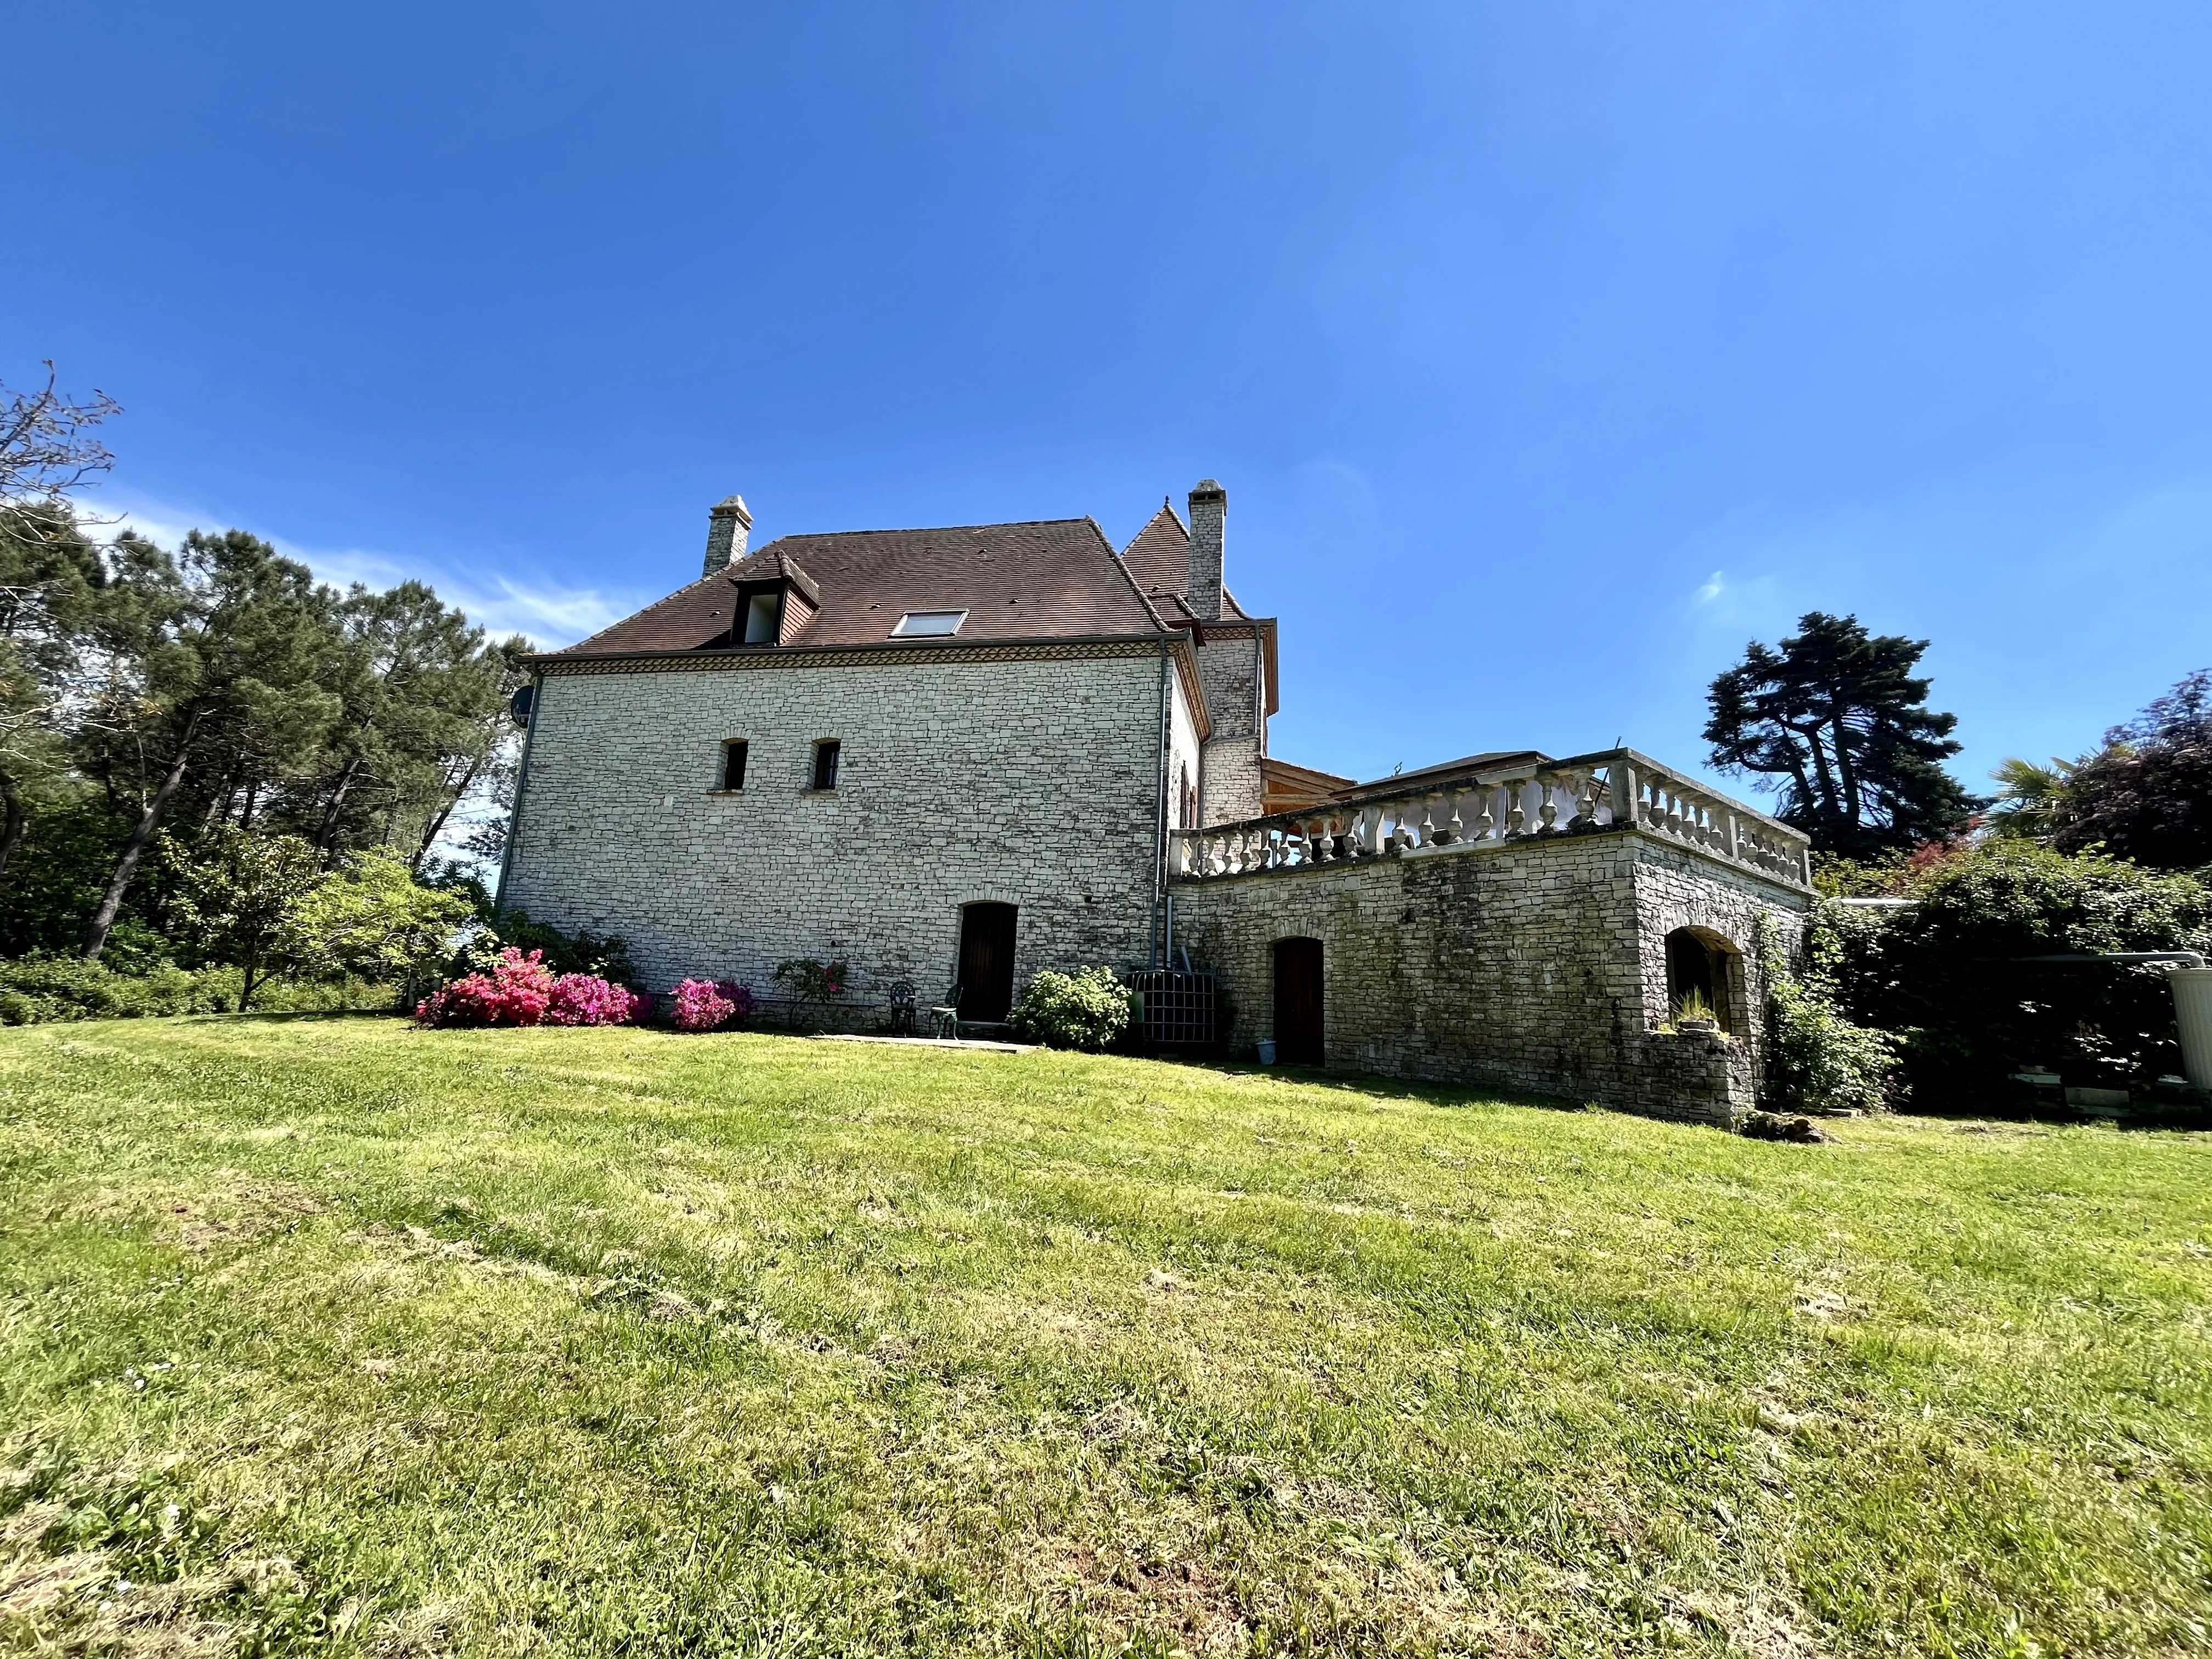 6-Bedroom Stone Property with Pool and Self Contained Apt - Belves Dordogne